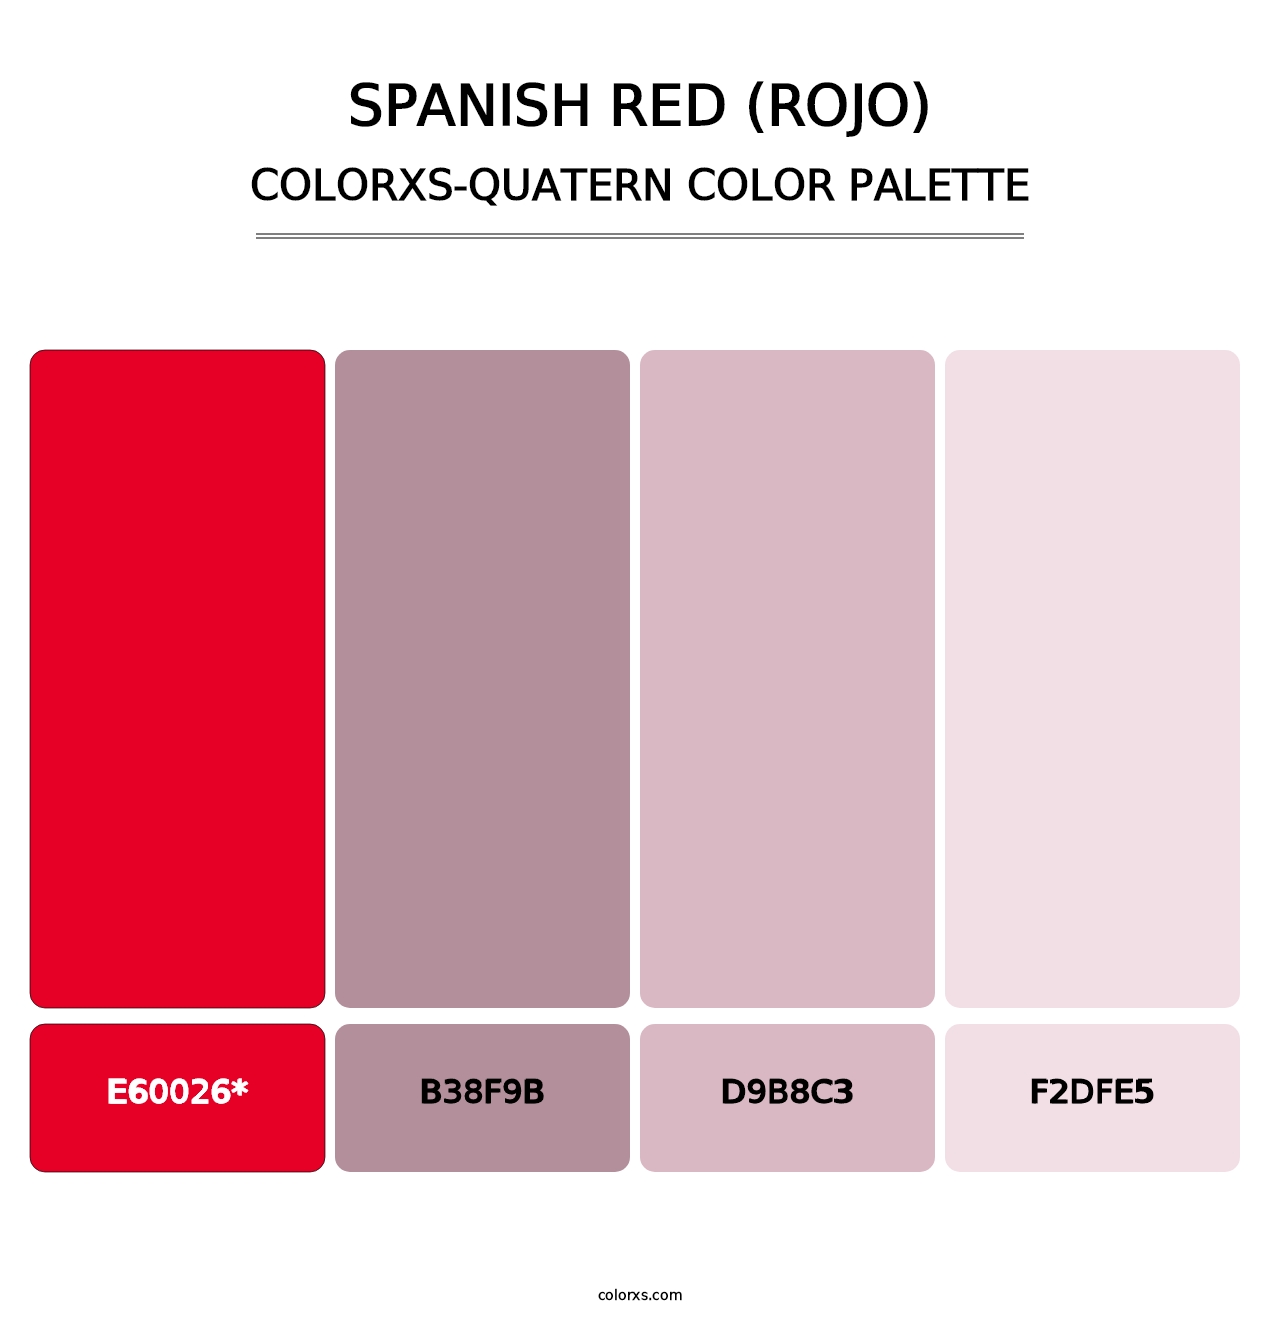 Spanish Red (Rojo) - Colorxs Quatern Palette